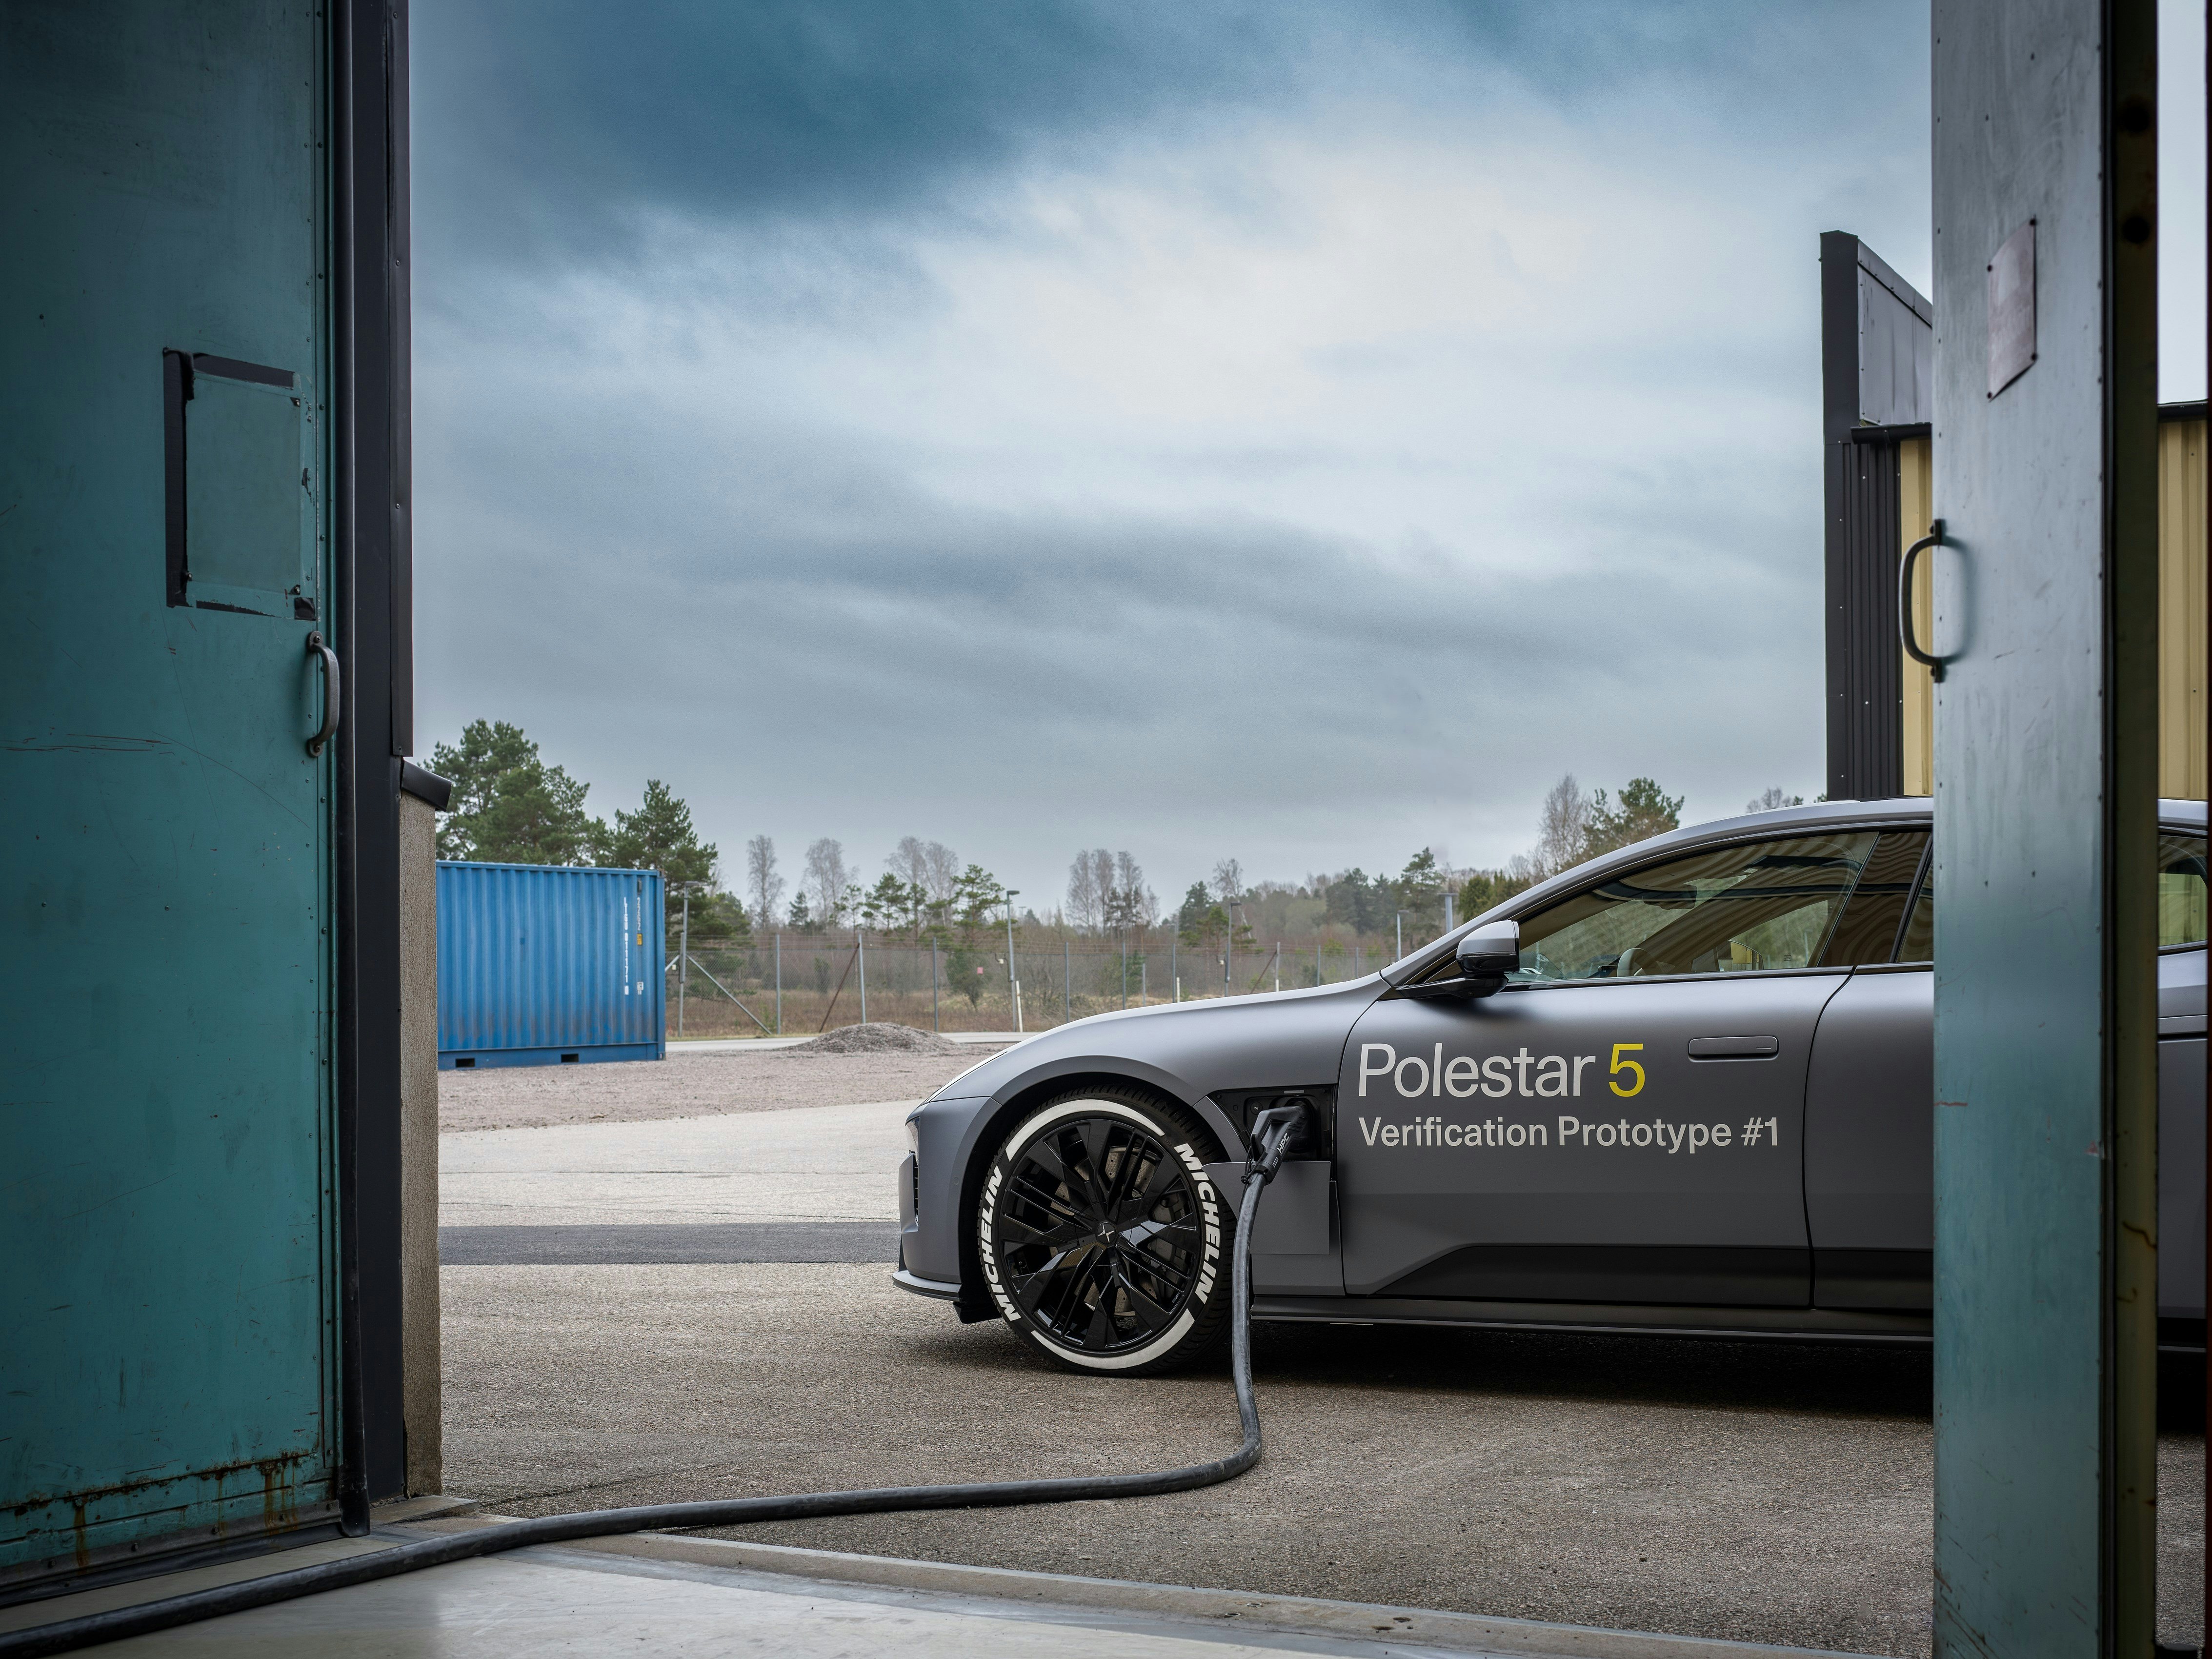 Polestar Shows Off EV That Can Charge fFom 10 to 80 Percent in 10 Minutes